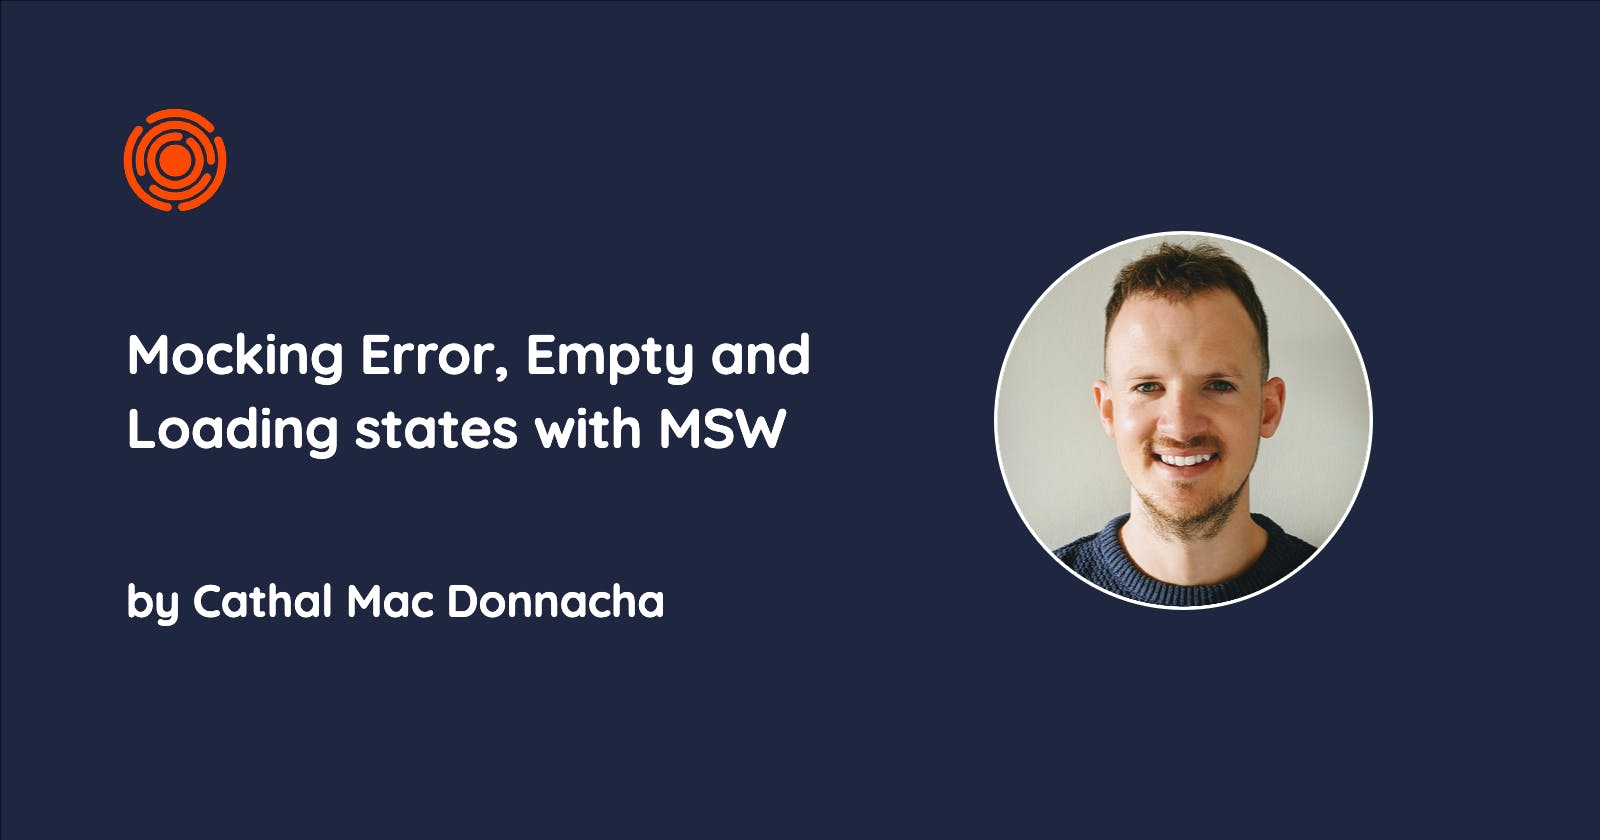 Mocking Error, Empty and Loading states with MSW